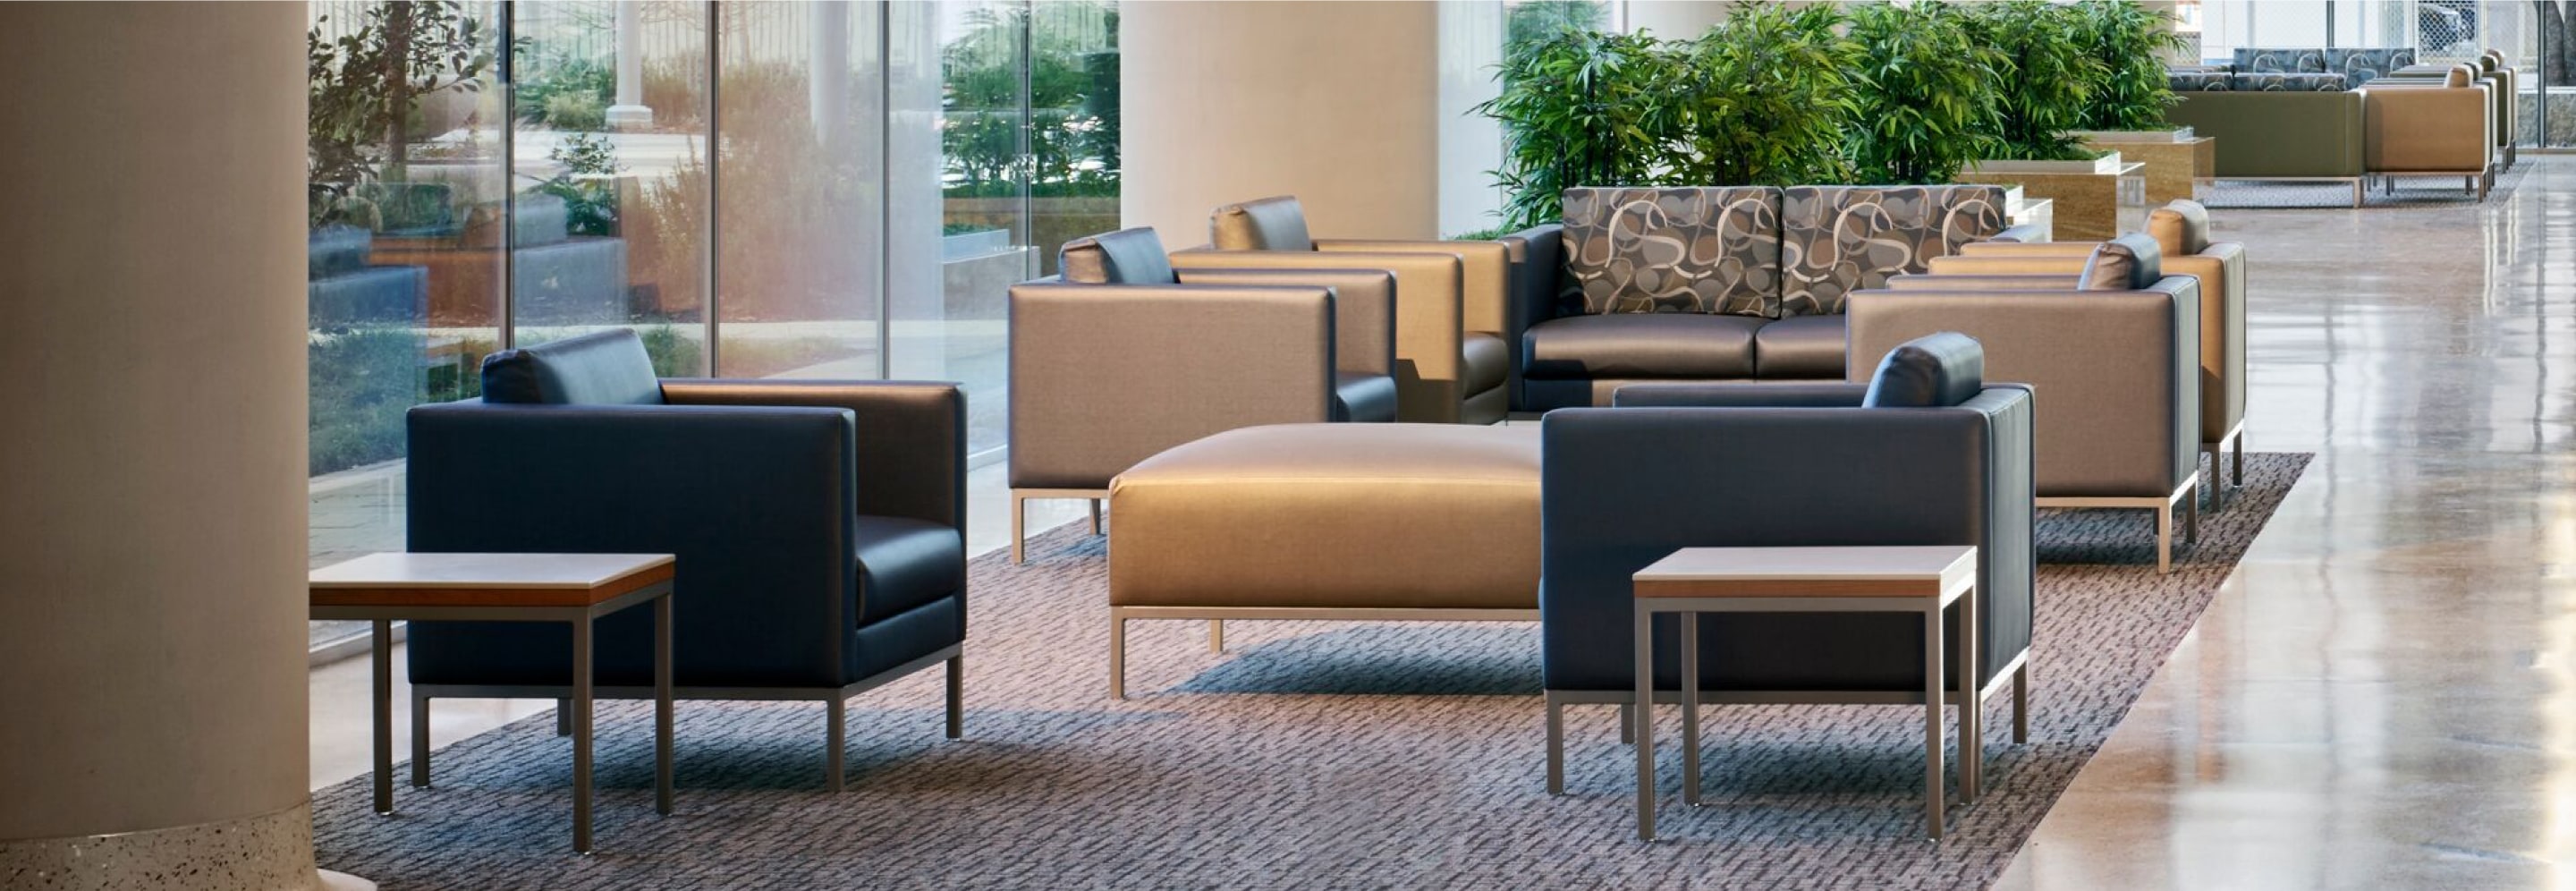 A window filled waiting area featuring Nemschoff Riva Armchairs, Sofas, and Side Tables.